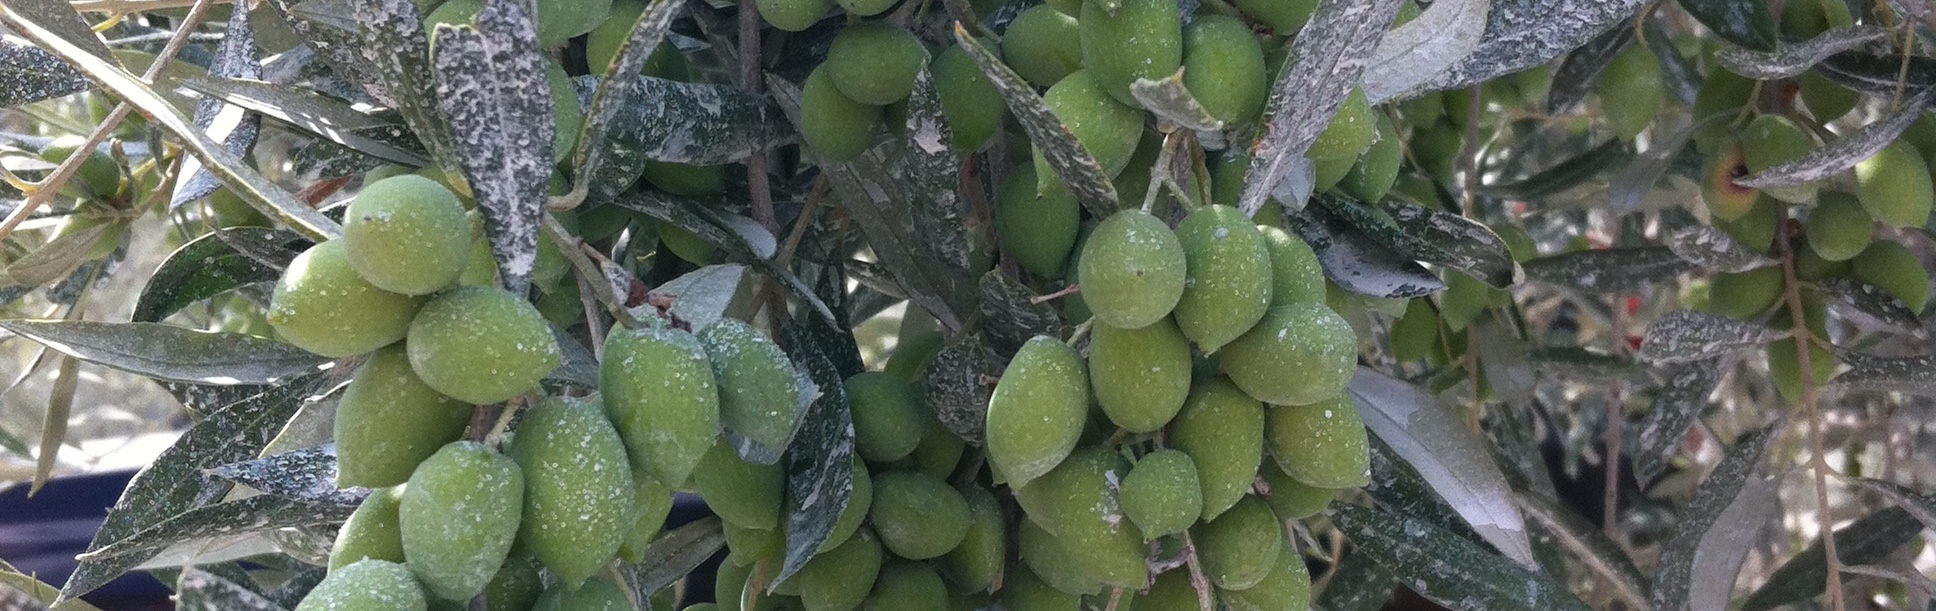 olives with kaolini